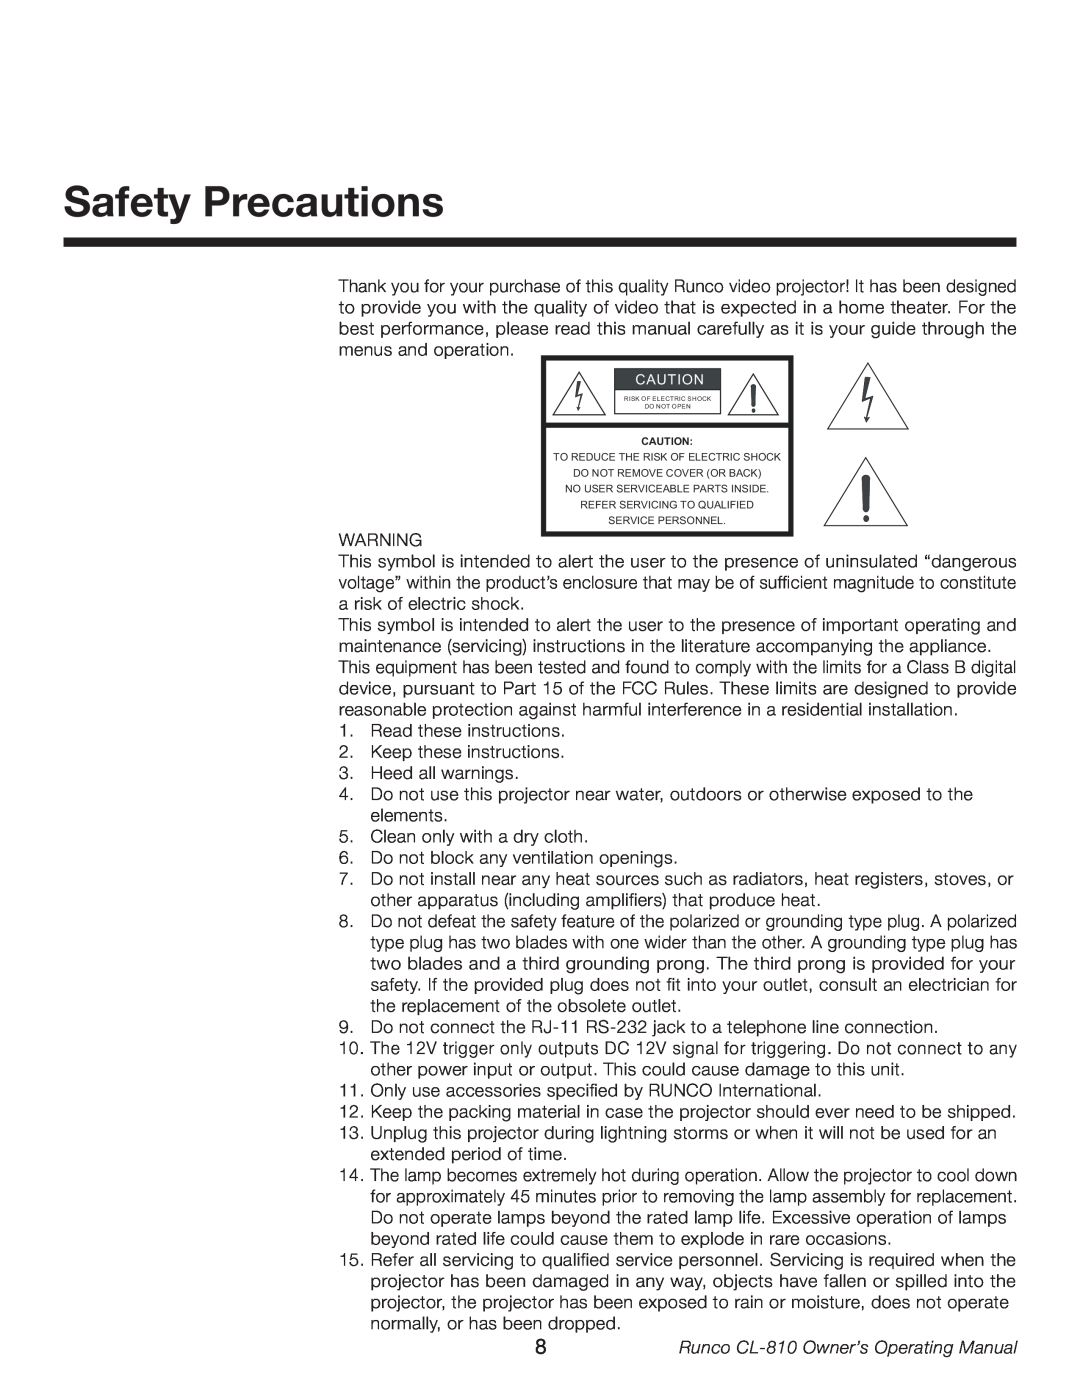 Runco manual Safety Precautions, Runco CL-810 Owner’s Operating Manual 